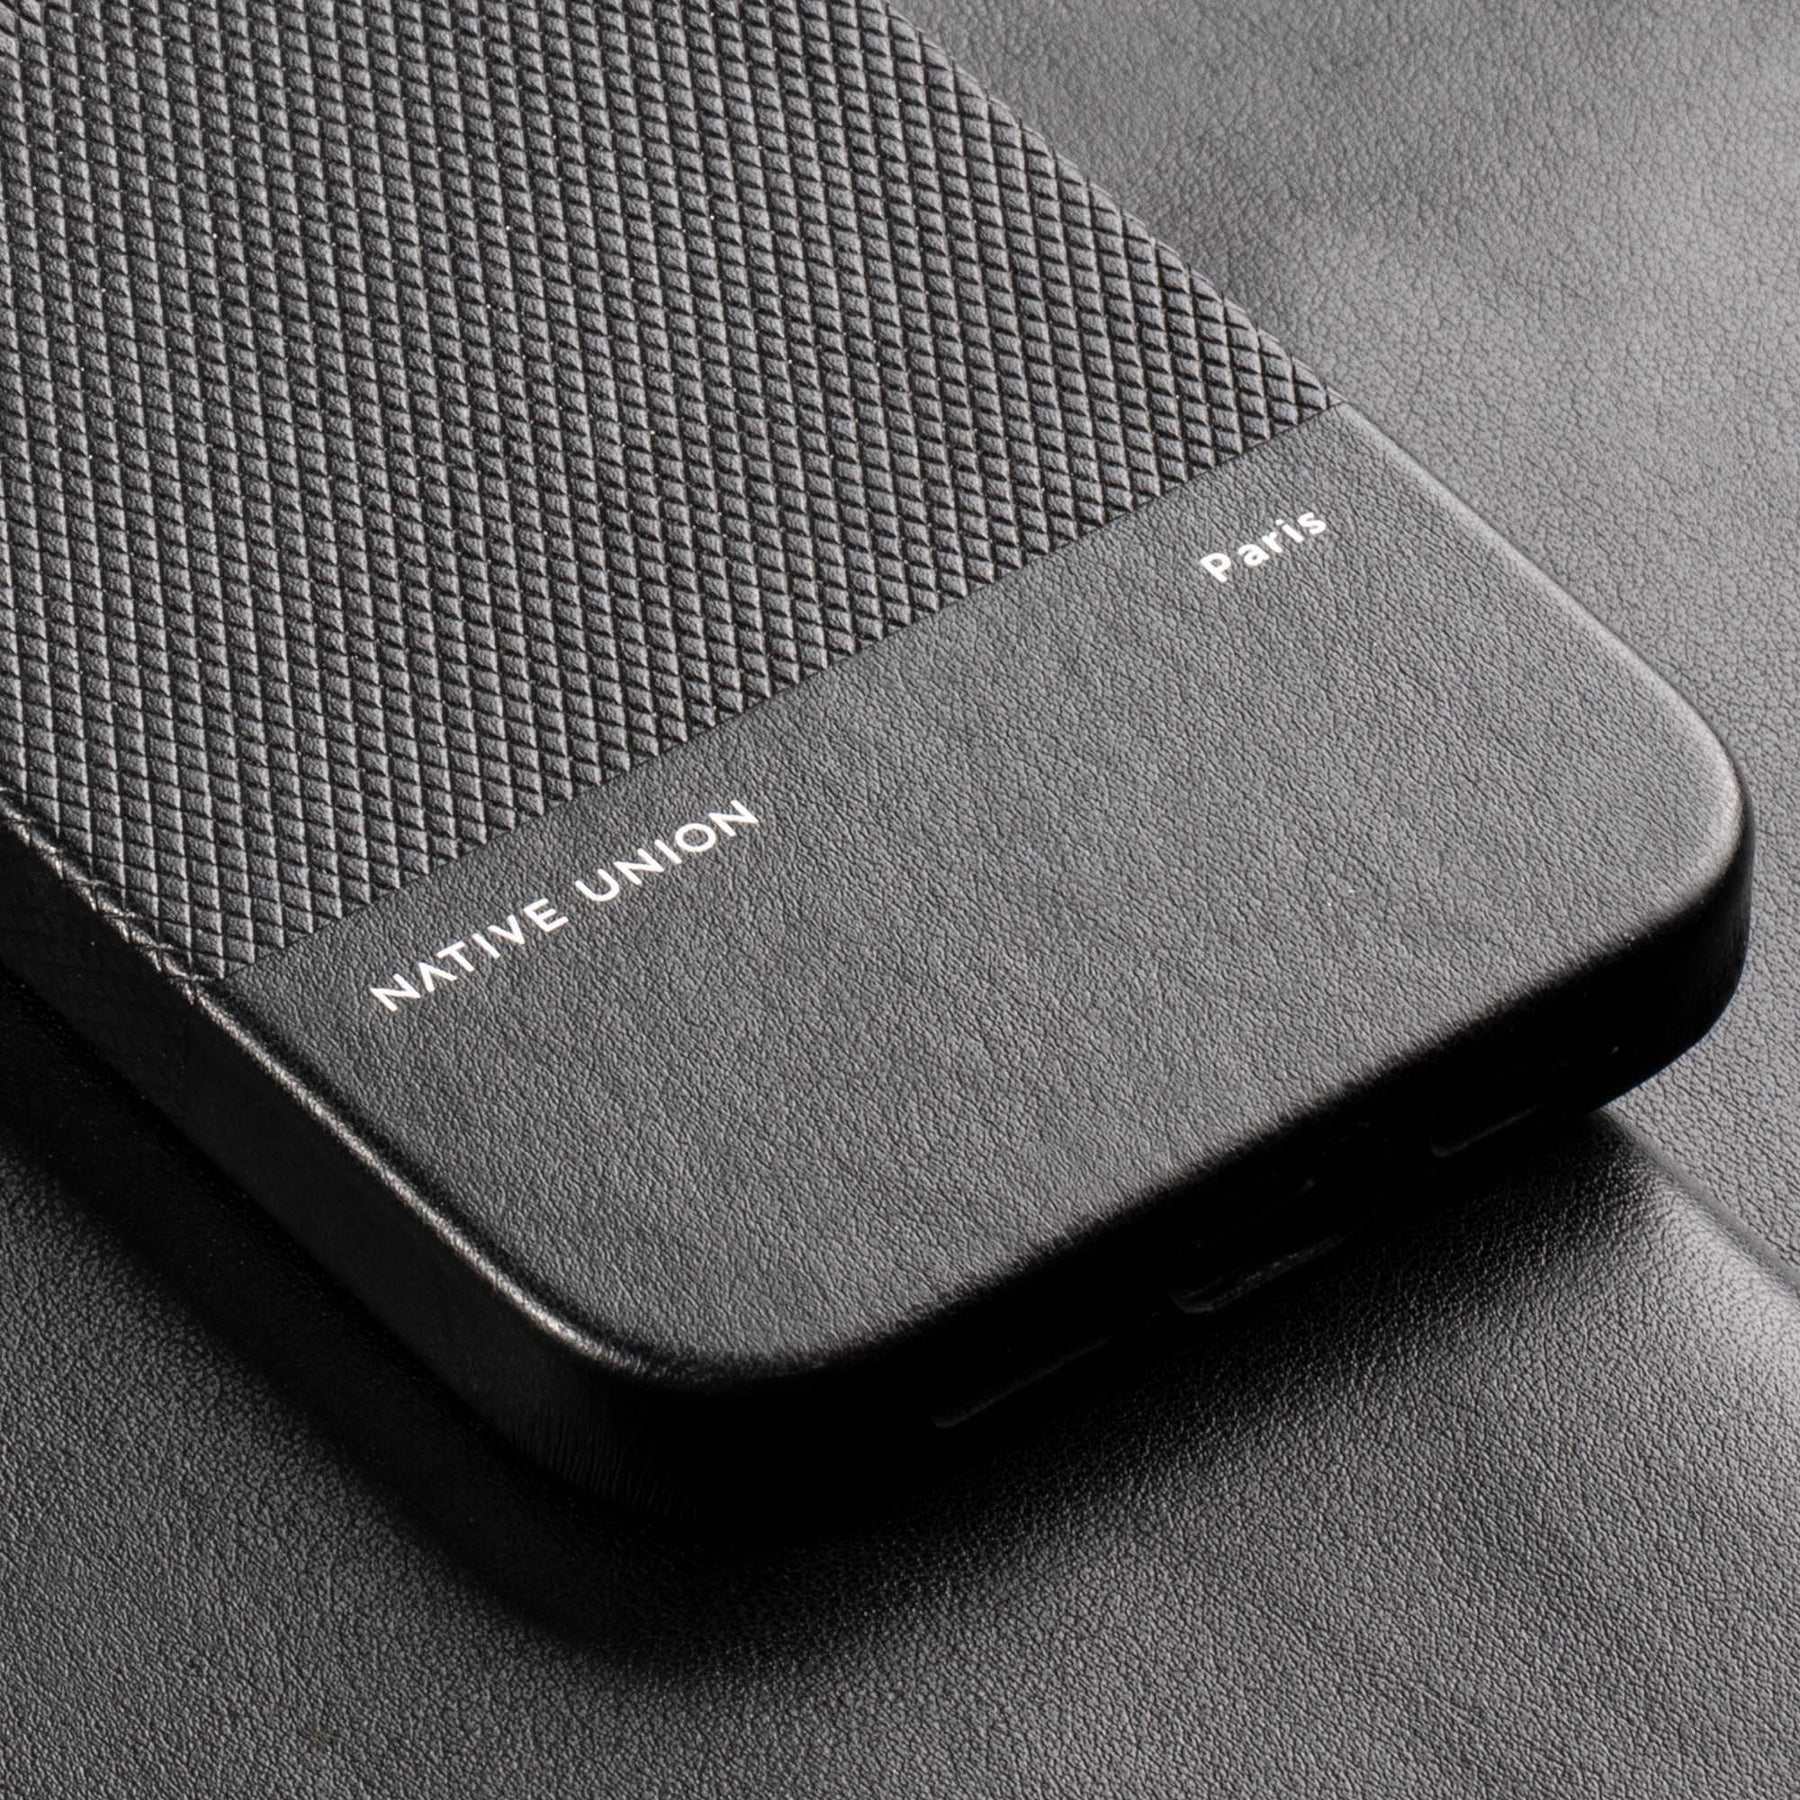 (Re)Classic Case for iPhone 12